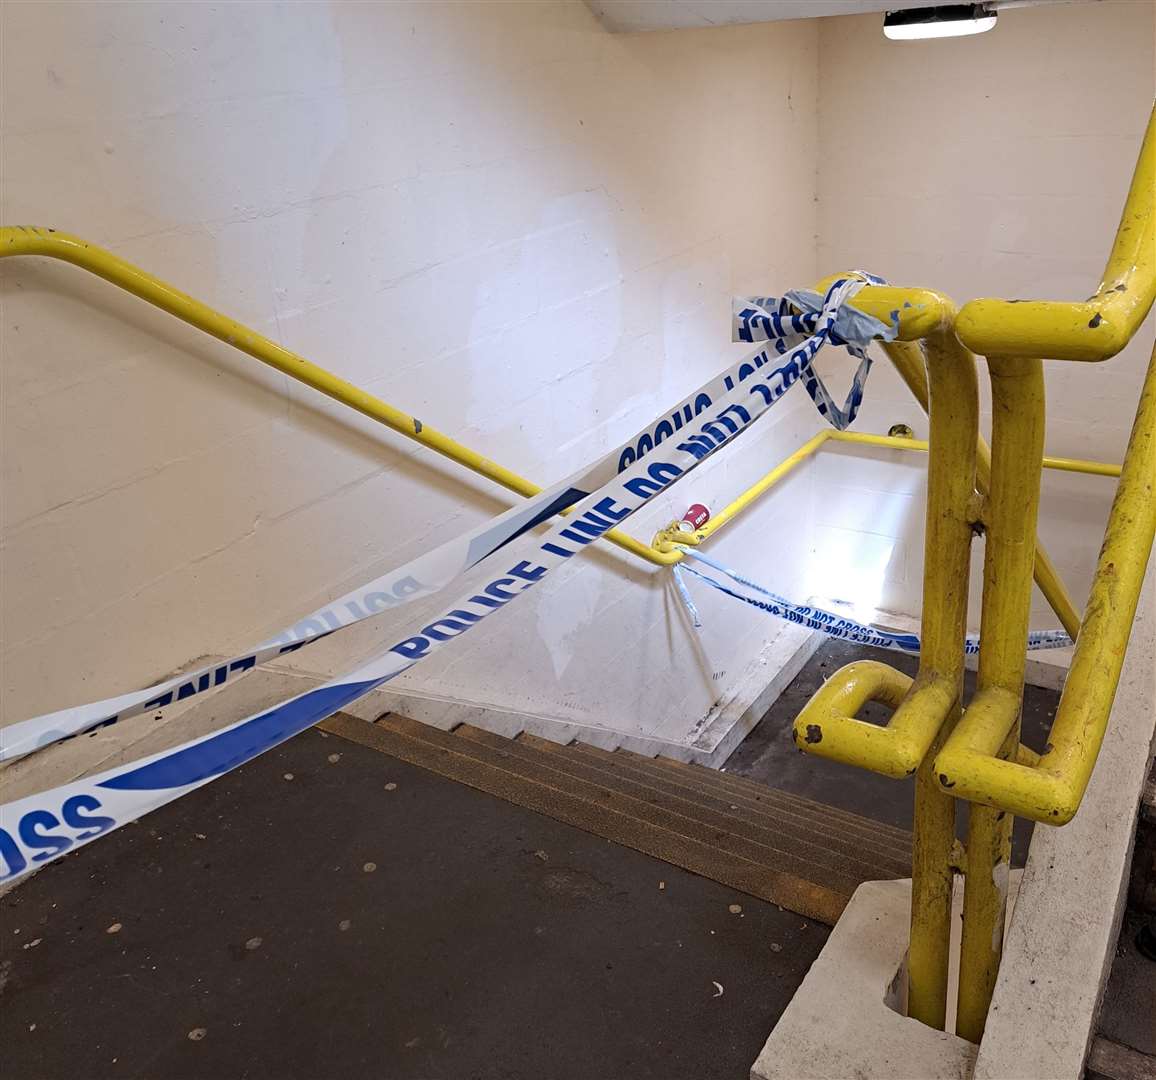 Areas of the car park remain taped off today while investigation work is carried out